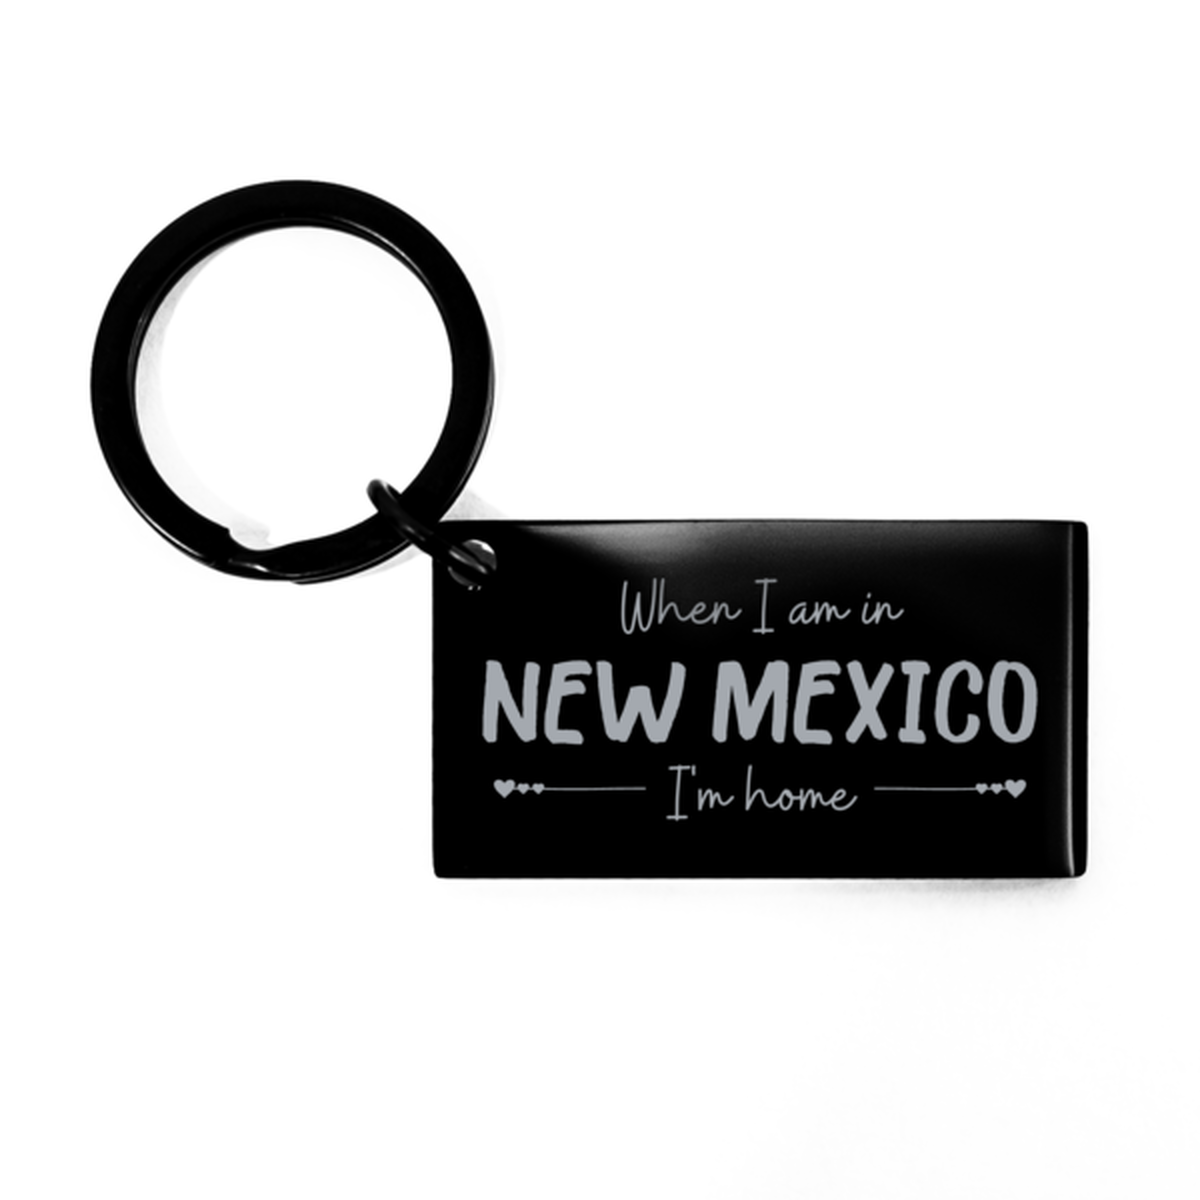 When I am in New Mexico I'm home Keychain, Cheap Gifts For New Mexico, State New Mexico Birthday Gifts for Friends Coworker